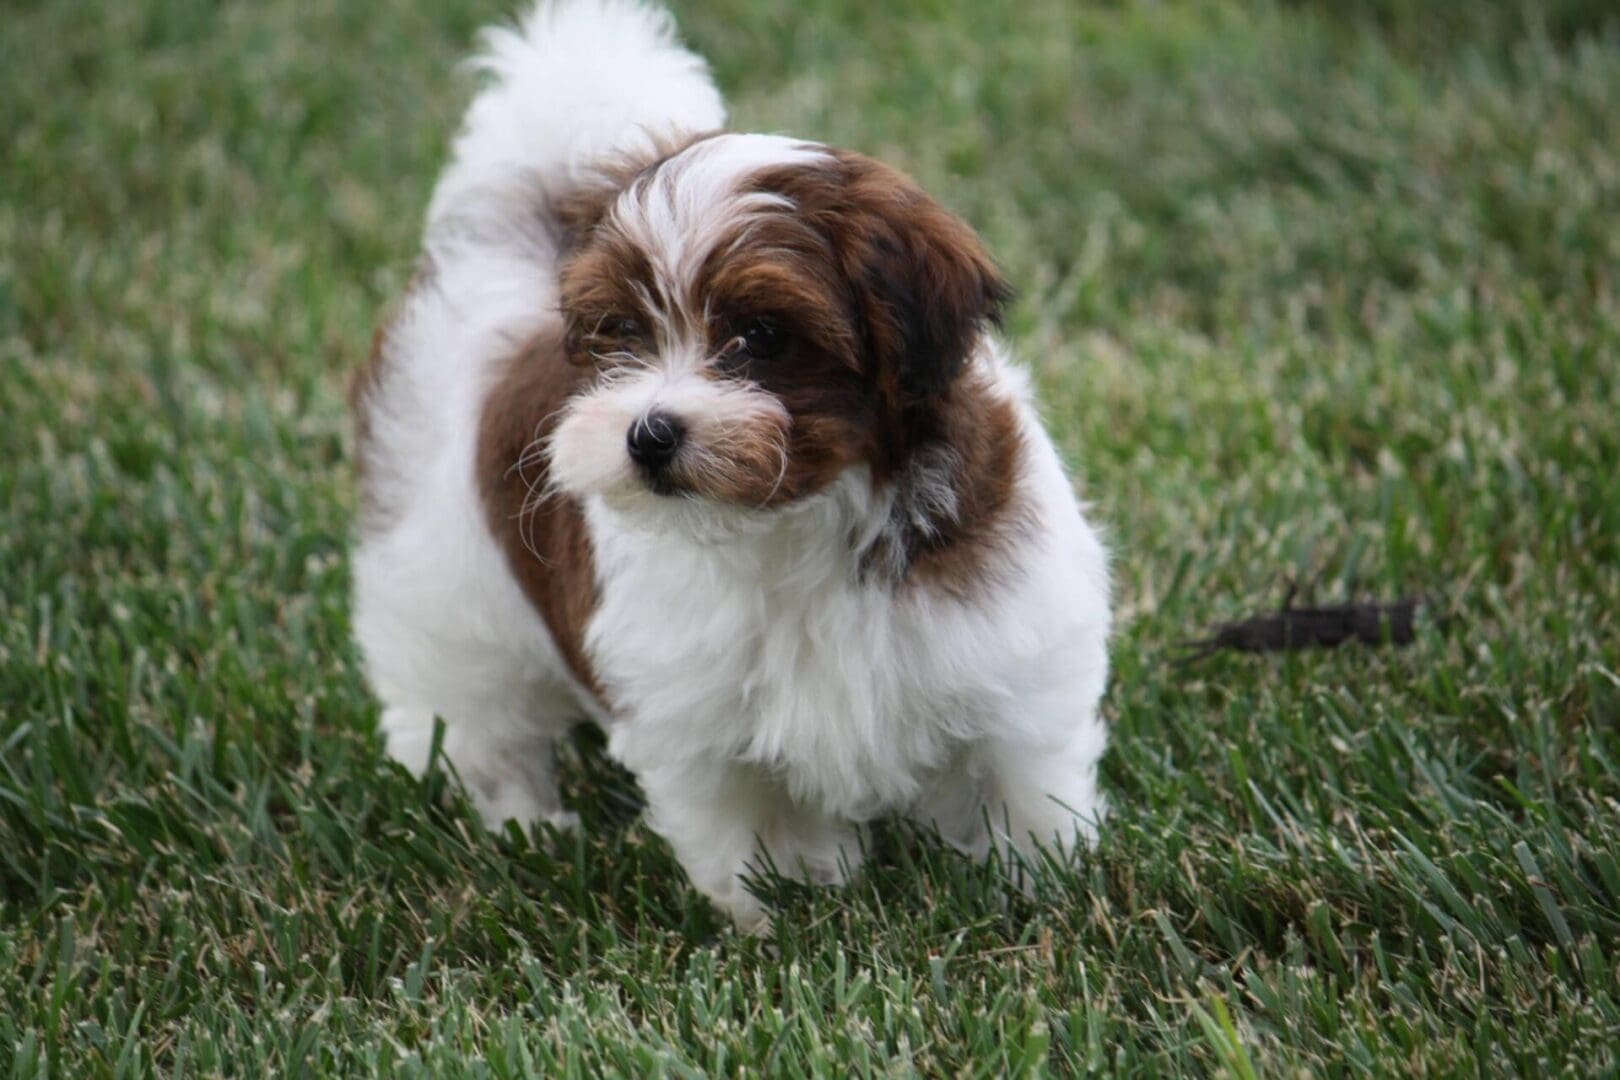 A small brown and white Havanese puppy standing in the grass.